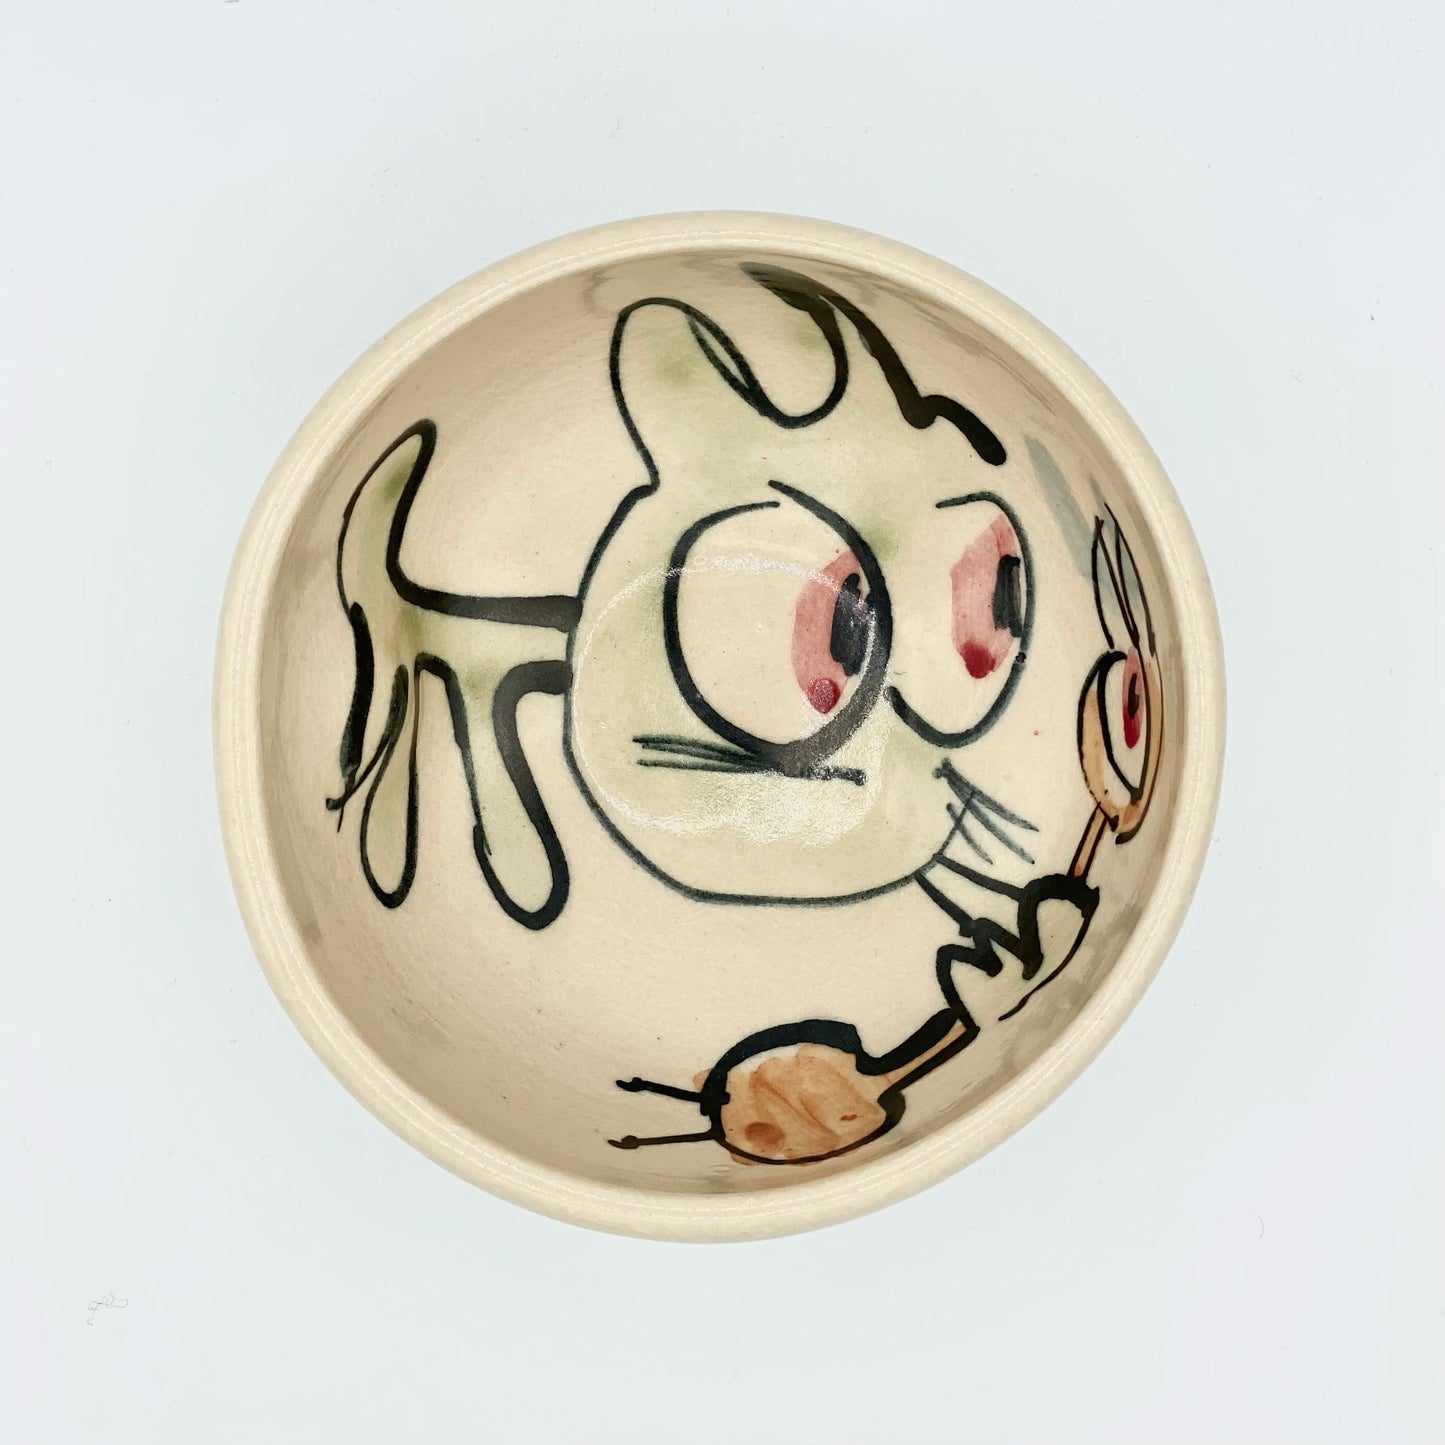 Whimsical Cereal Bowl by MNO Clay